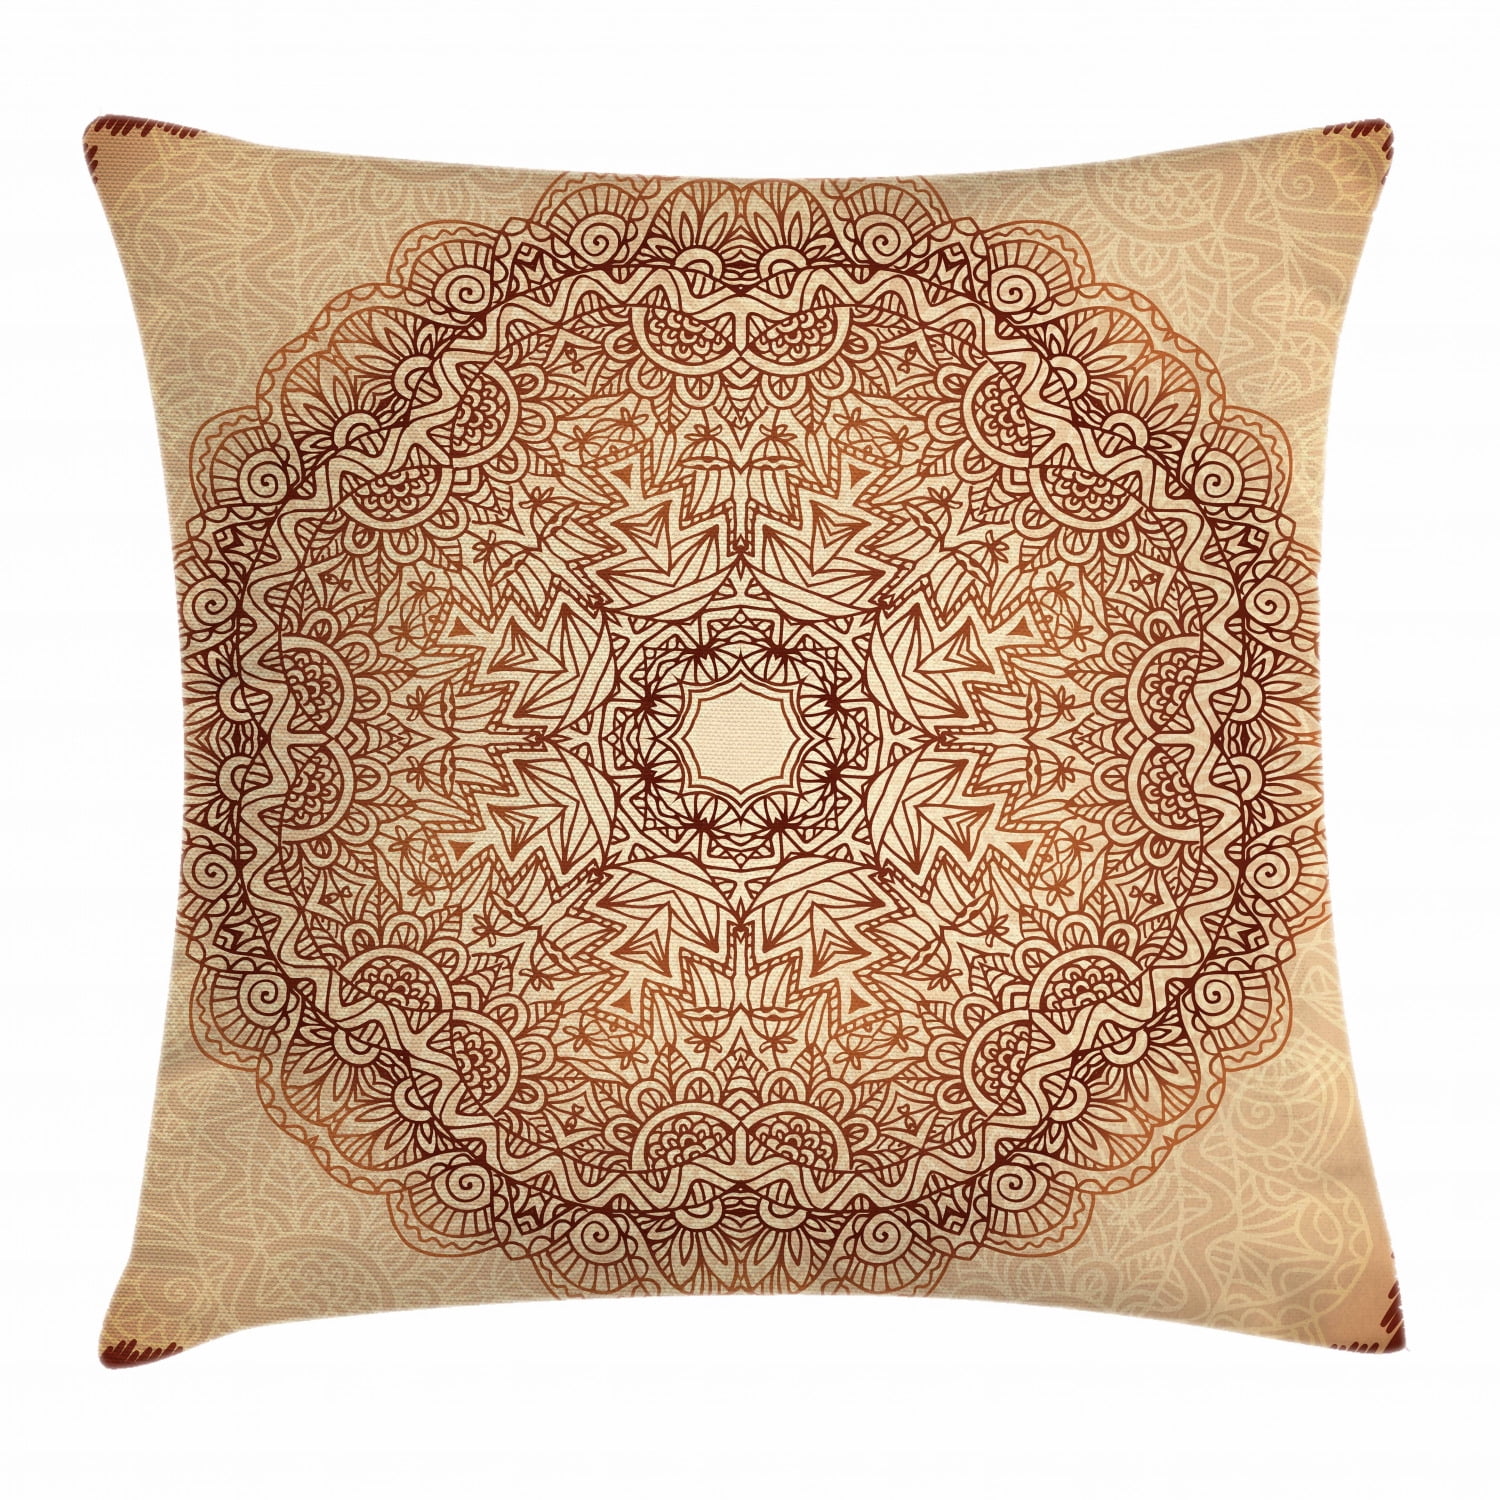 Ethnic Throw Pillow Case Three Turtles Ornamental Square Cushion Cover 16 Inches